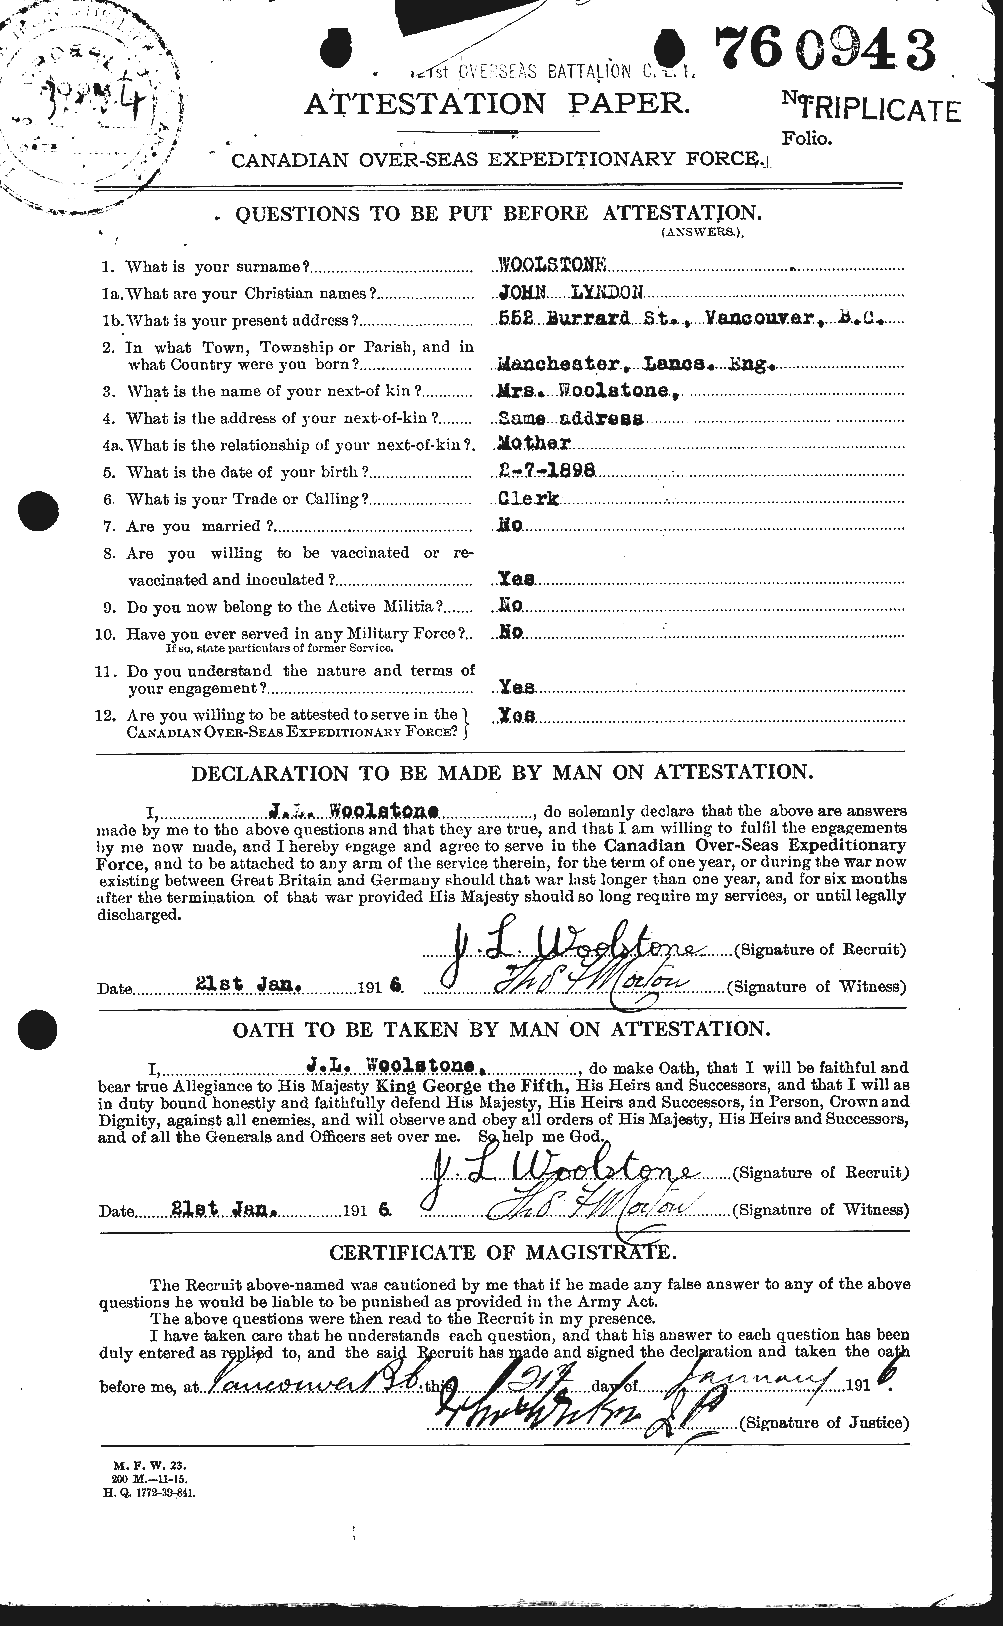 Personnel Records of the First World War - CEF 685266a